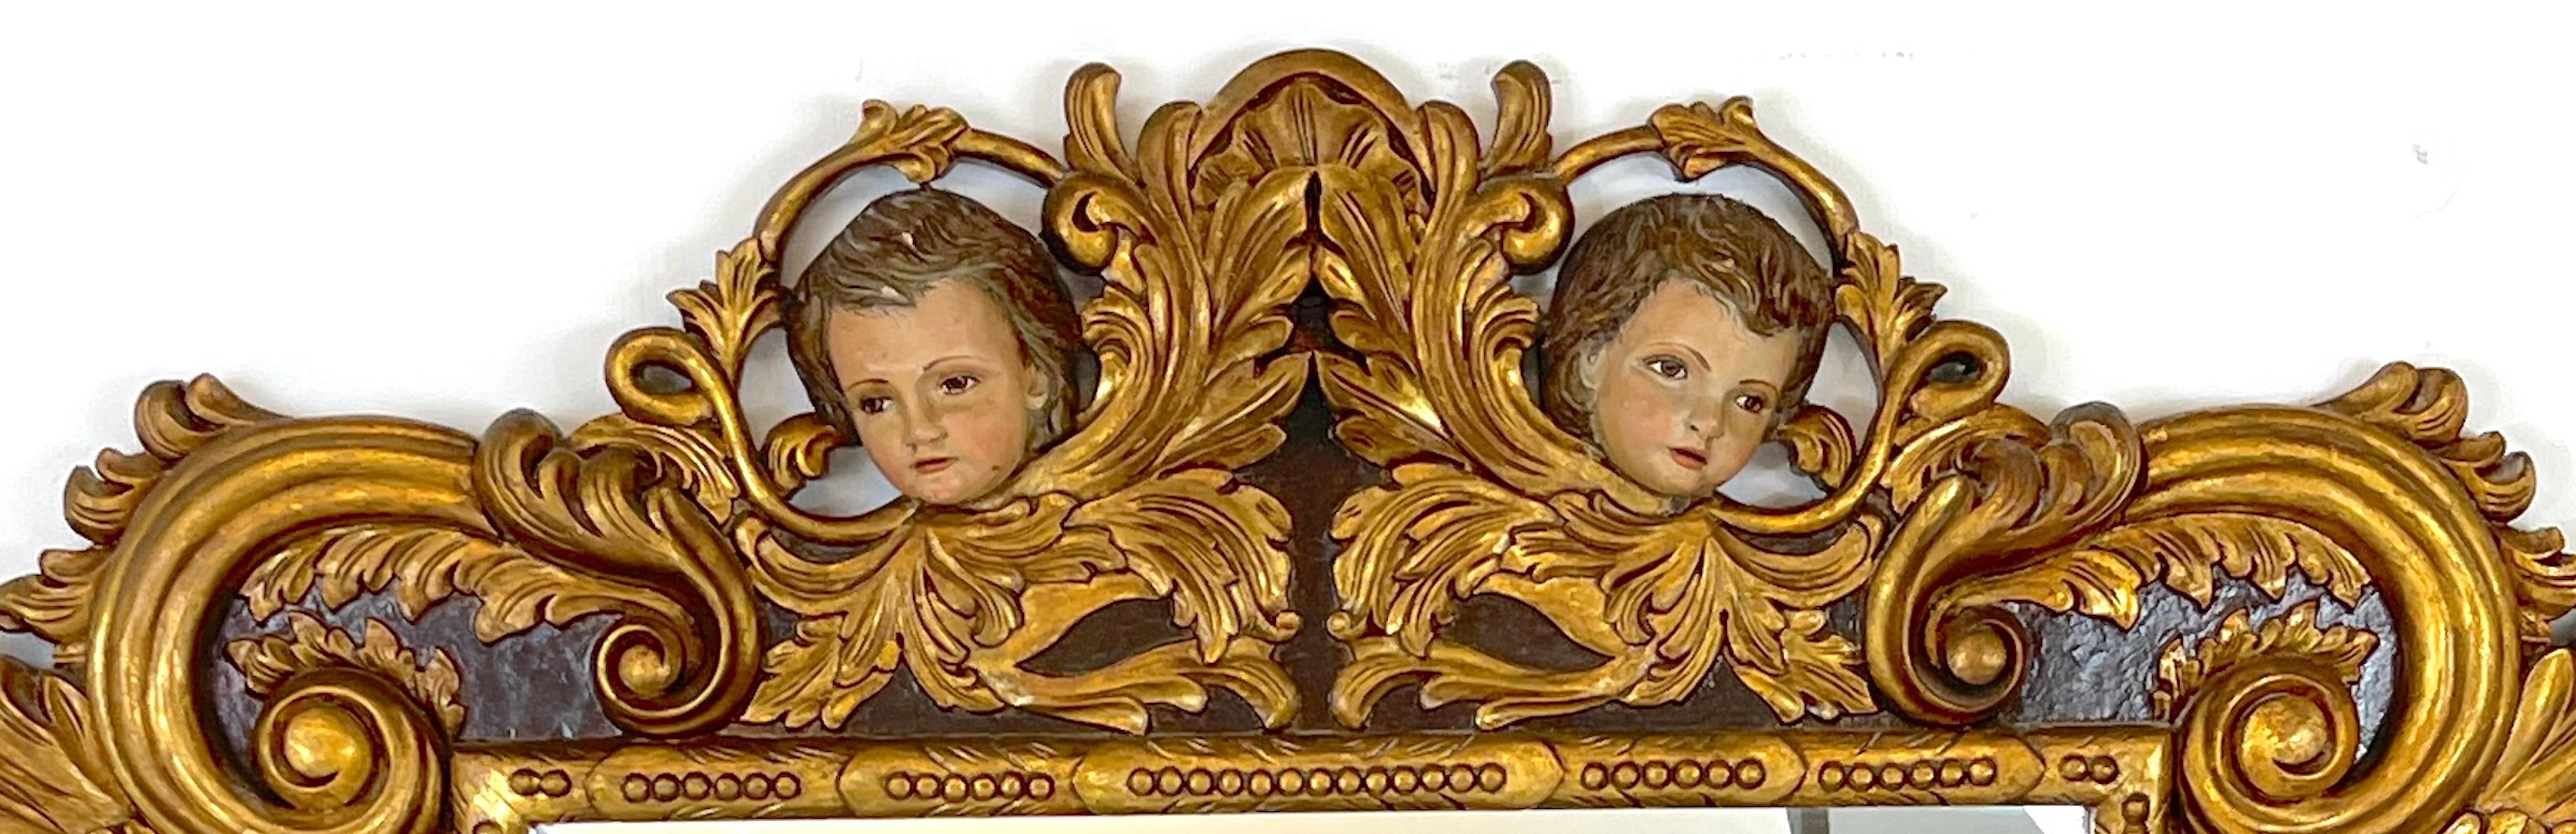 Palatial Italian Carved Figural Giltwood & Polychromed Baroque Style Mirror In Good Condition For Sale In West Palm Beach, FL